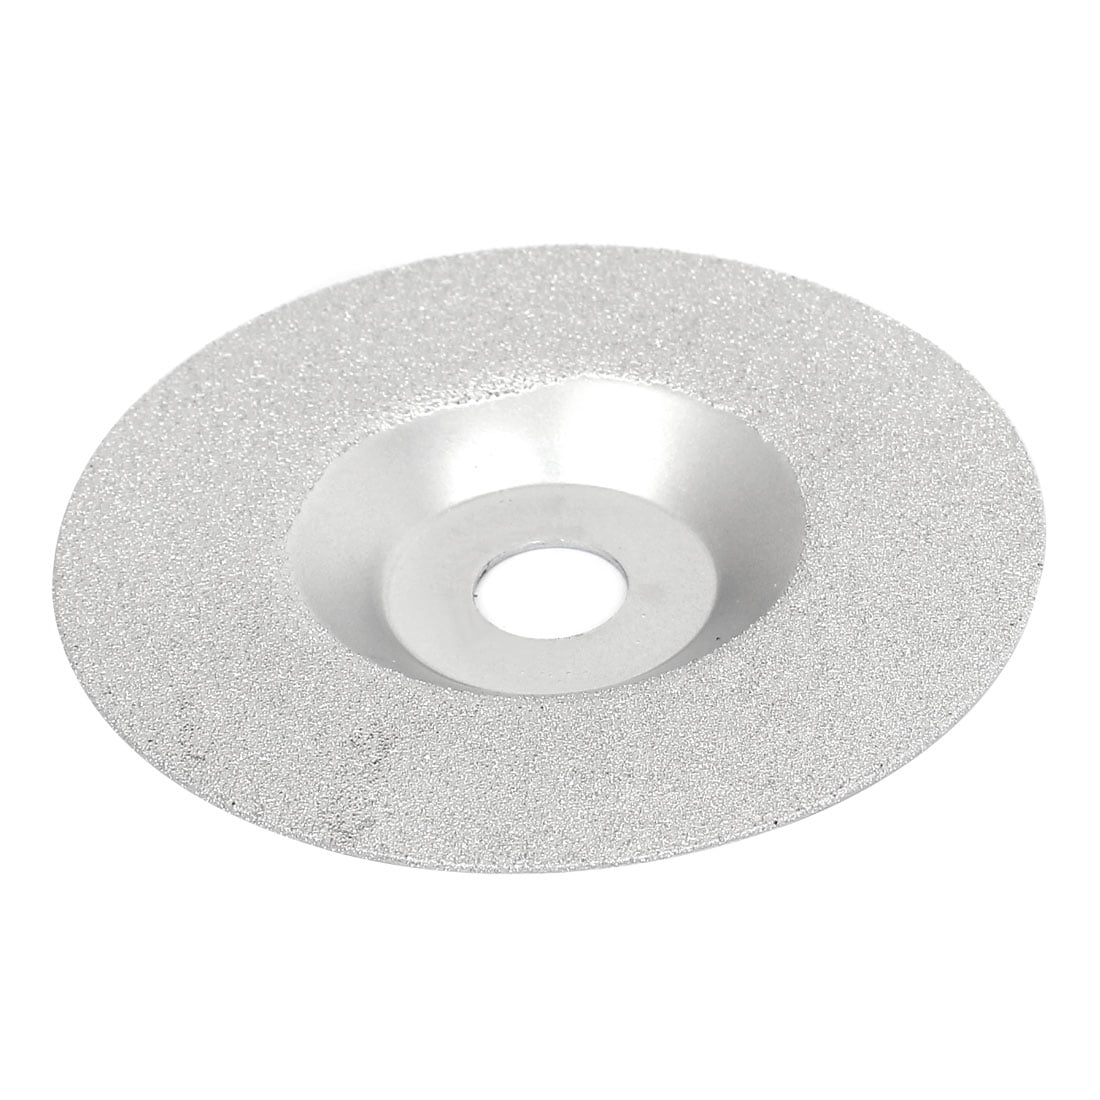 10cm Dia 100 Grit Diamond Coated Glass Grinding Cutting Disc Gray 